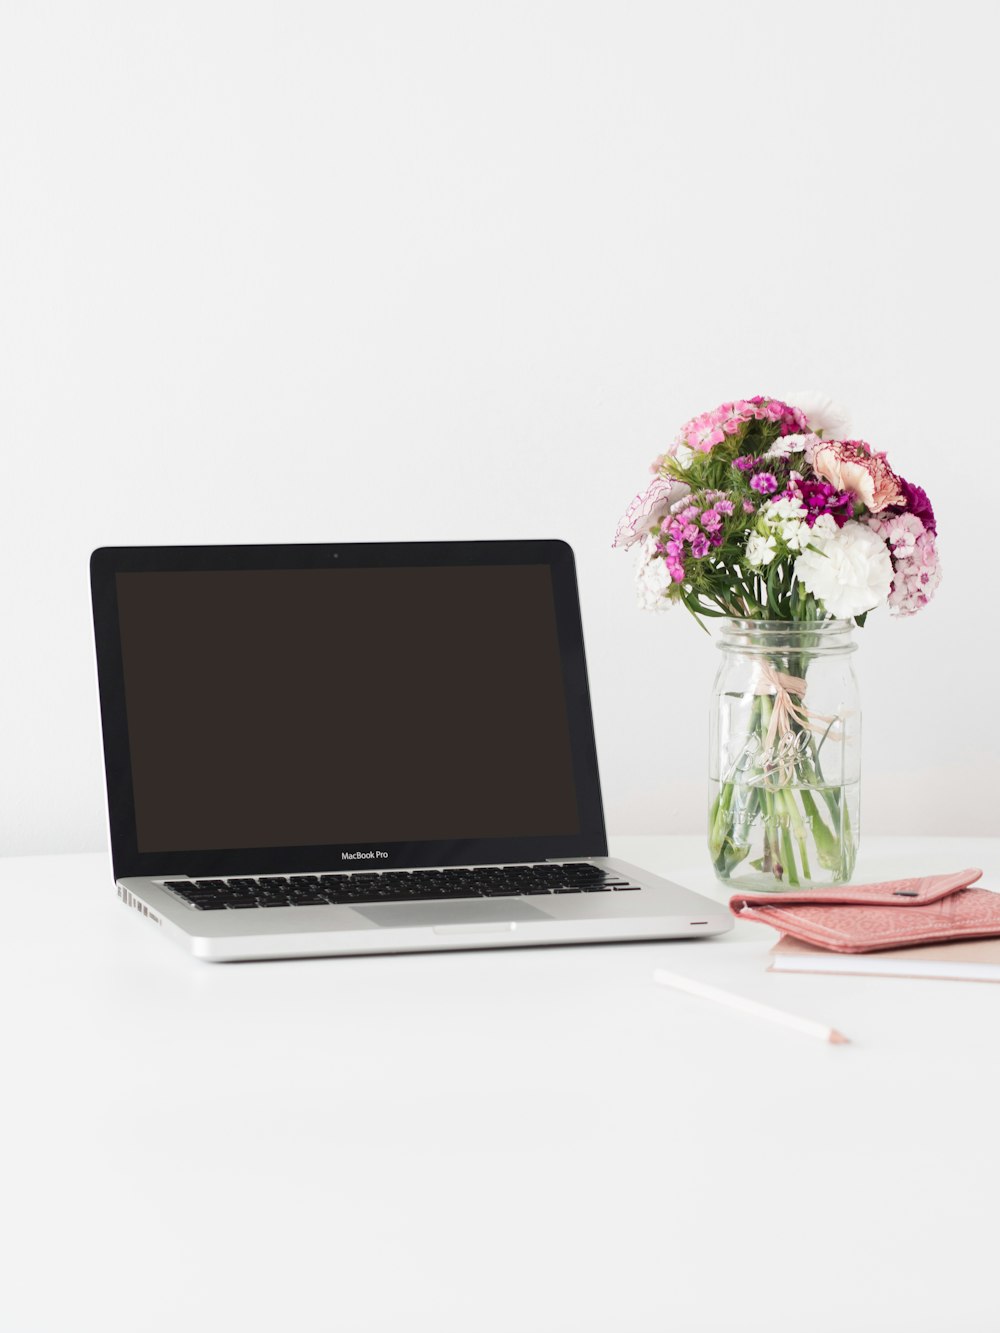 macbook pro beside pink and white flowers in clear glass vase